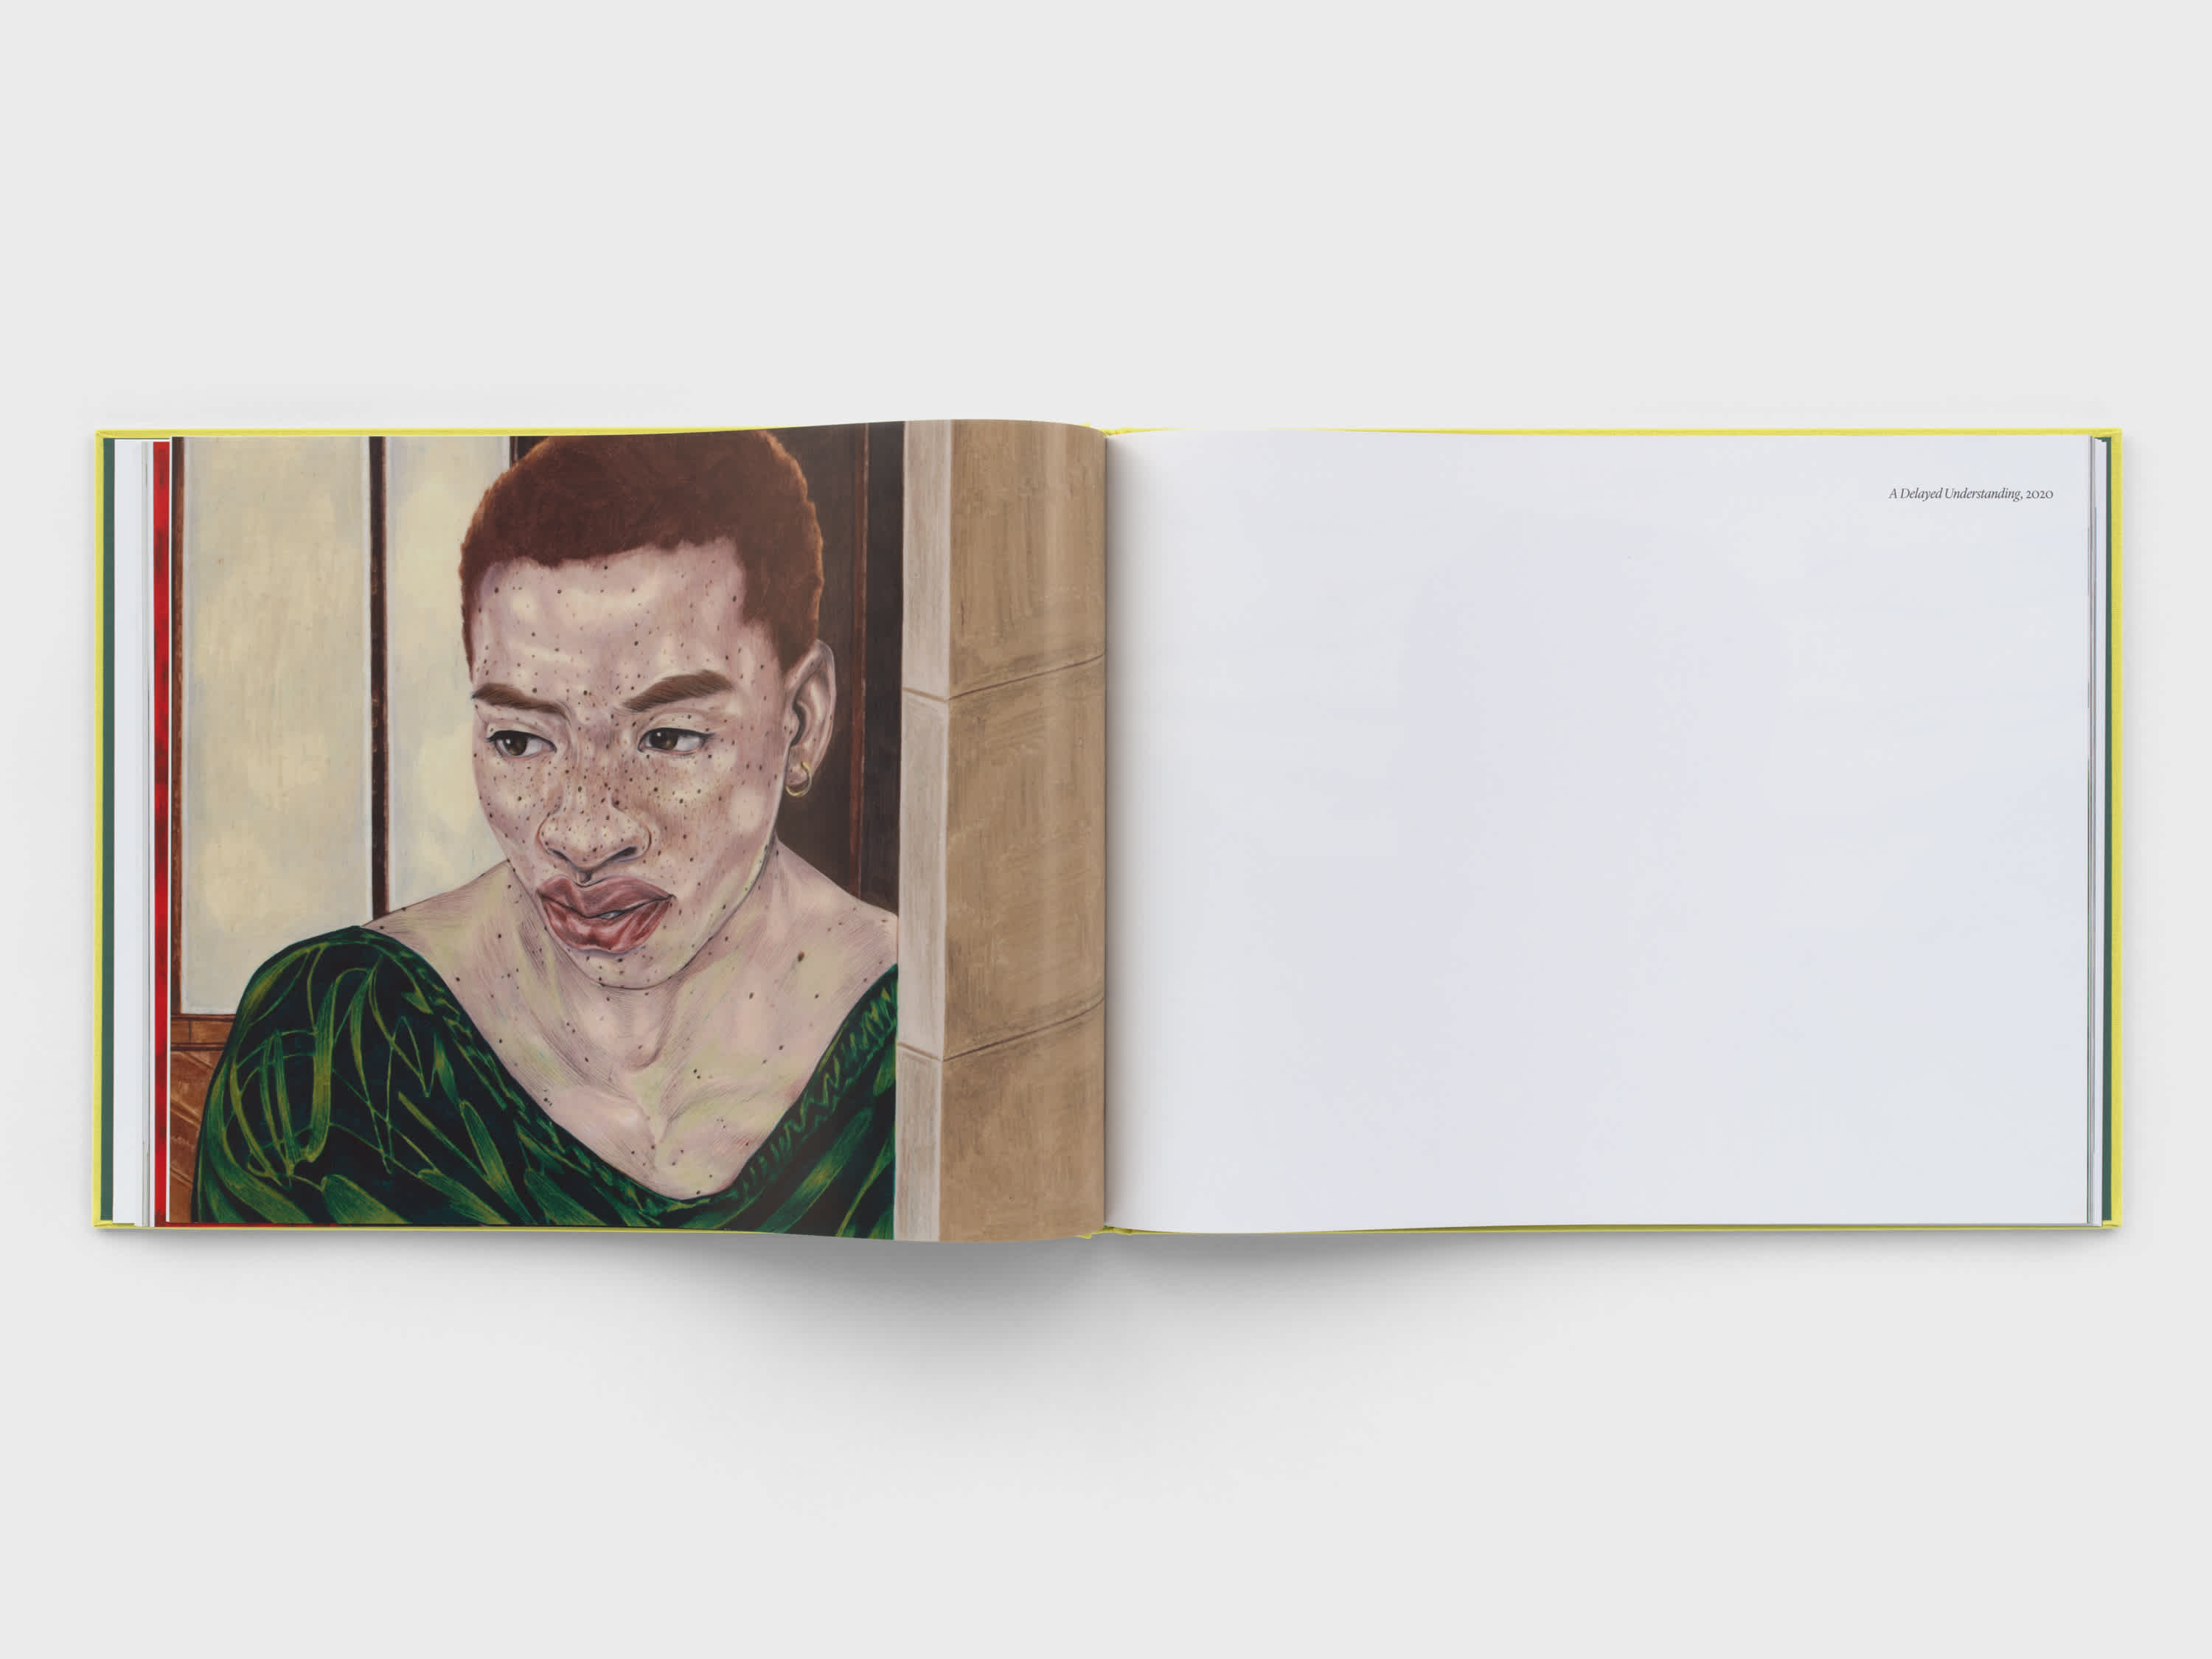 Two pages of an open book. The right page is blank. The left page has a drawing of a woman's face. She wears a dark green shirt and seems to be standing in a doorway.